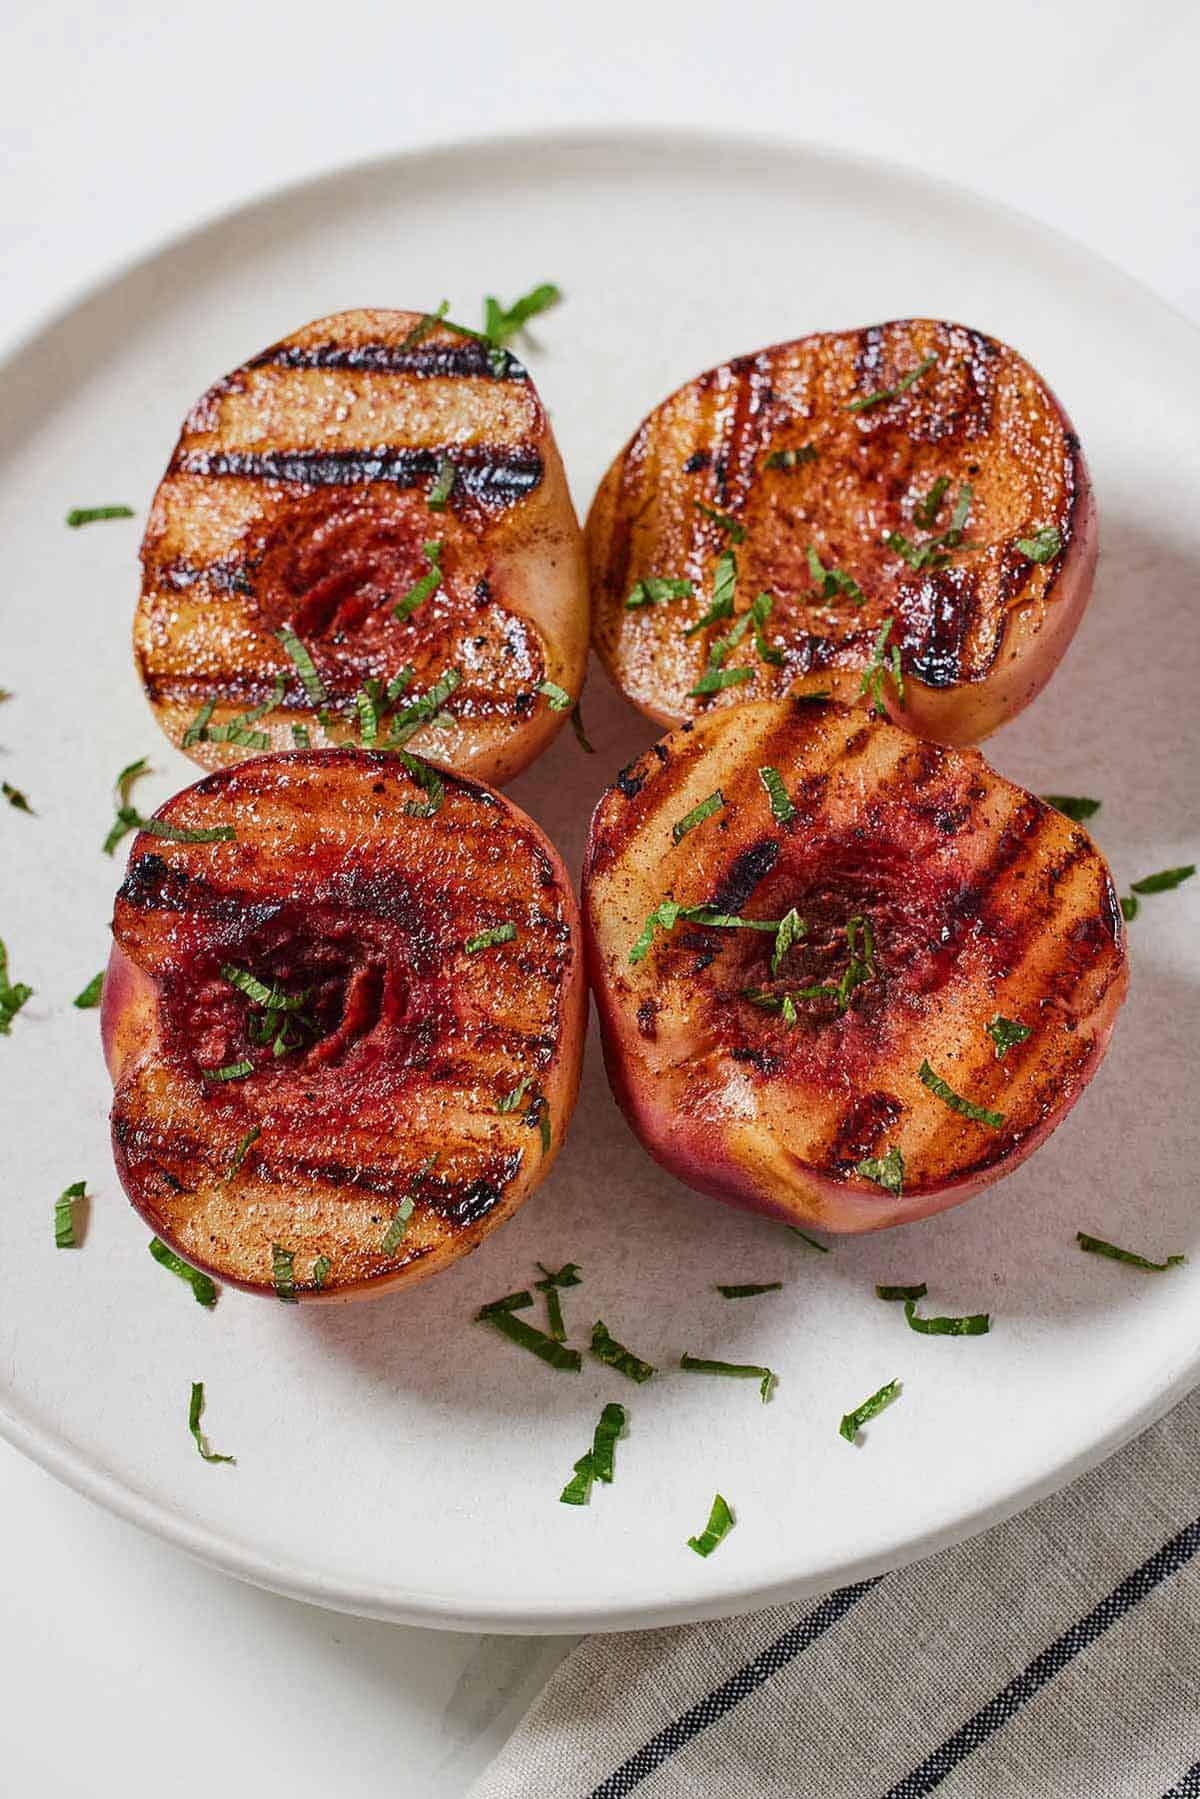 A plate with four grilled peaches with fresh chopped mint leaves as garnish.